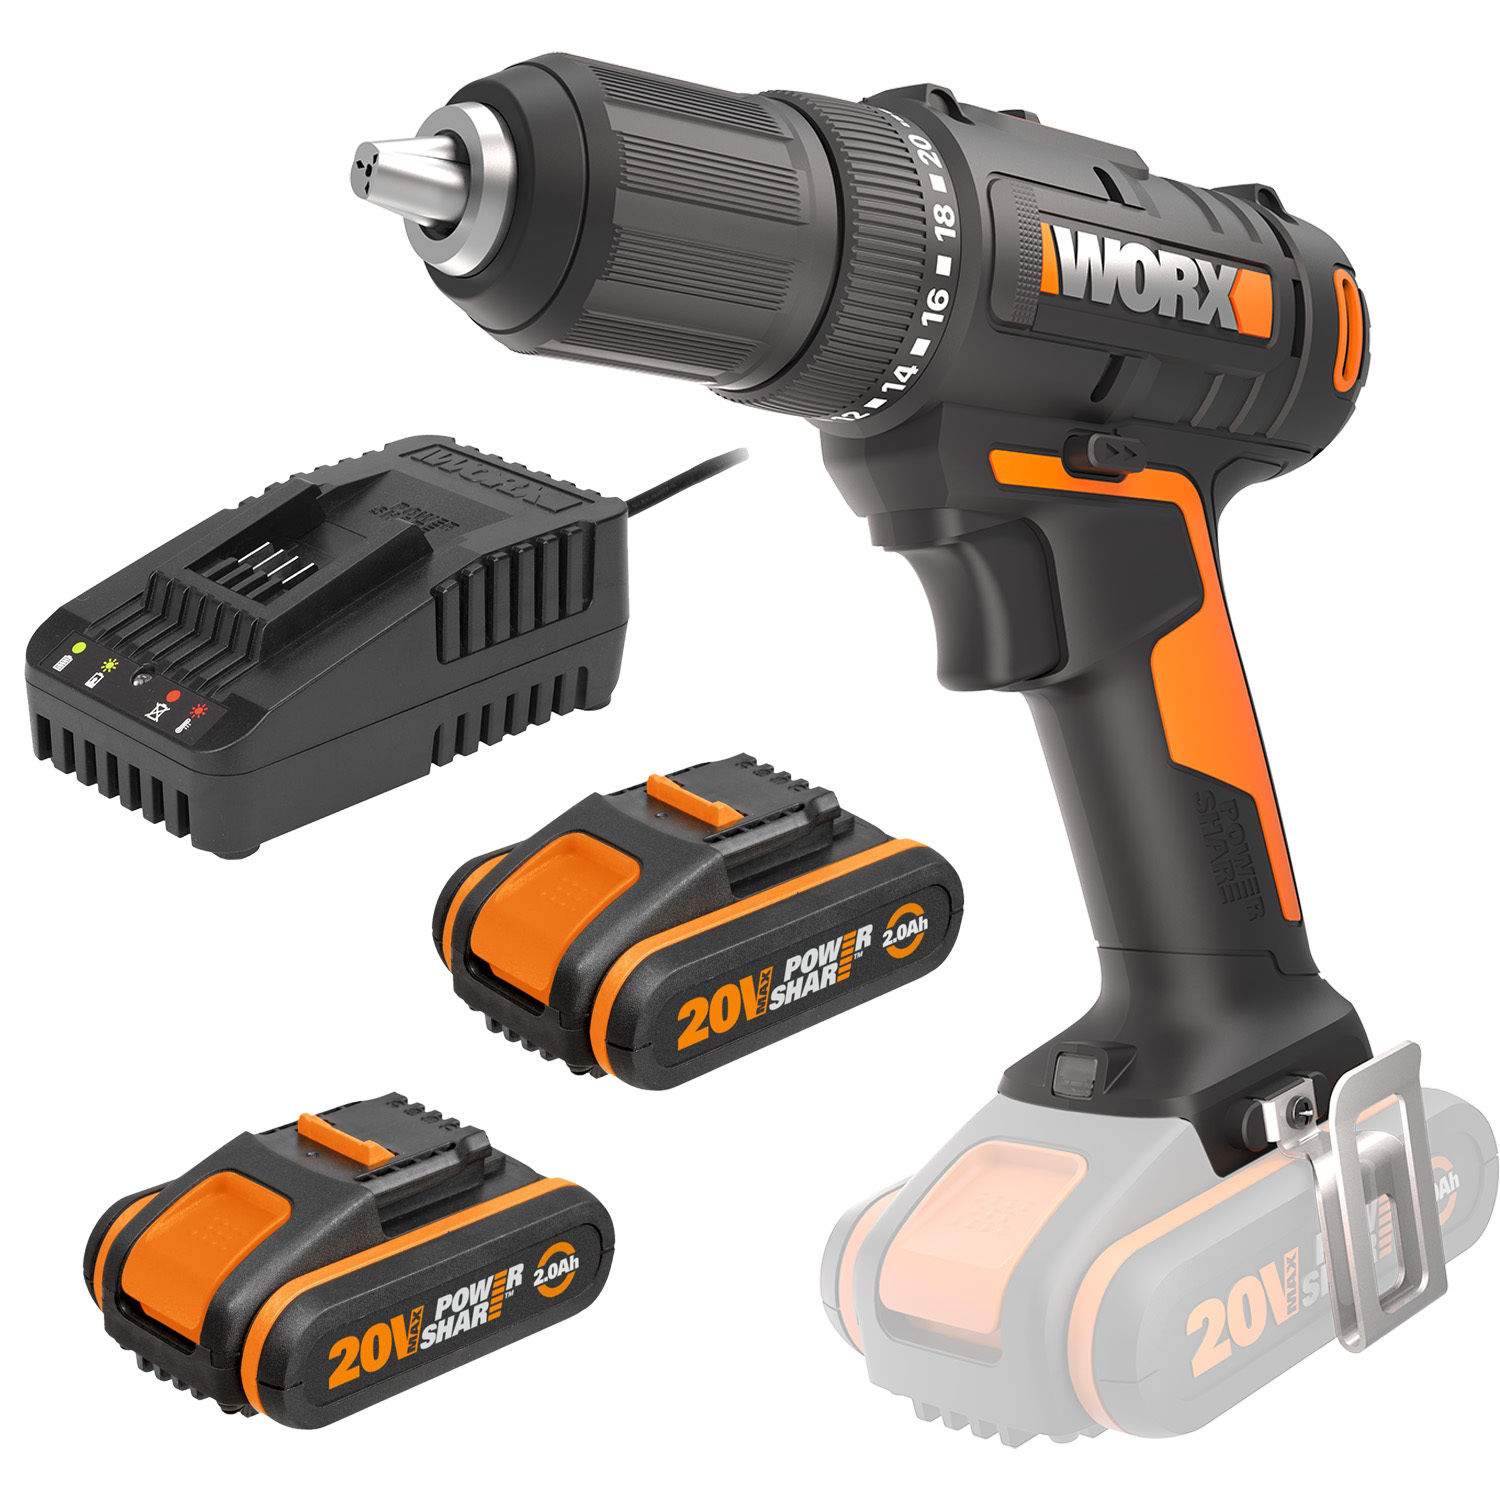 WORX 20V Cordless 13mm Drill Driver Skin w/ 2x POWERSHARE Batteries & Charger - WX108.B